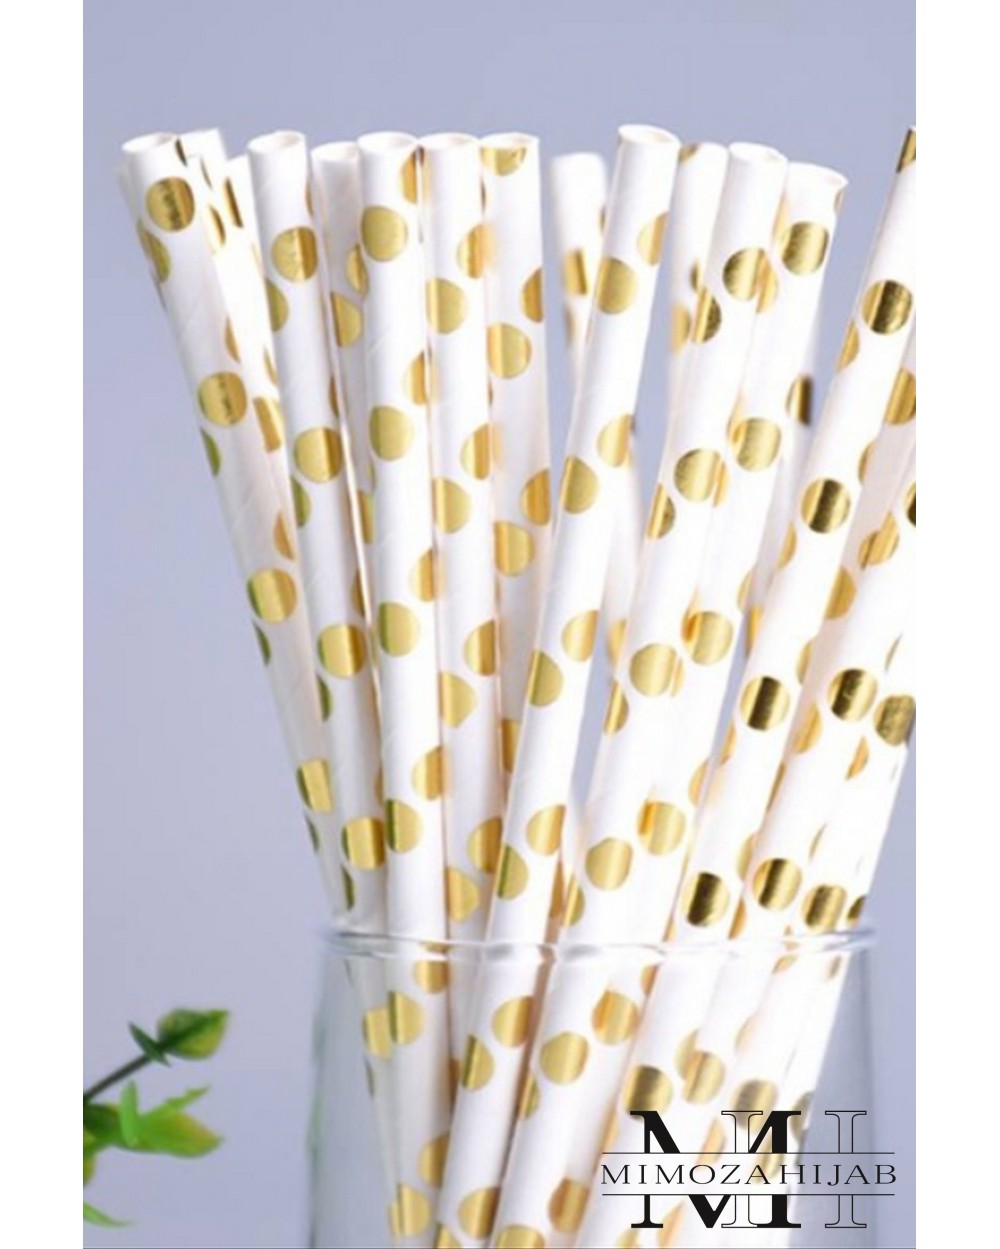 Lot 25 cardboard straws with colored polka dots